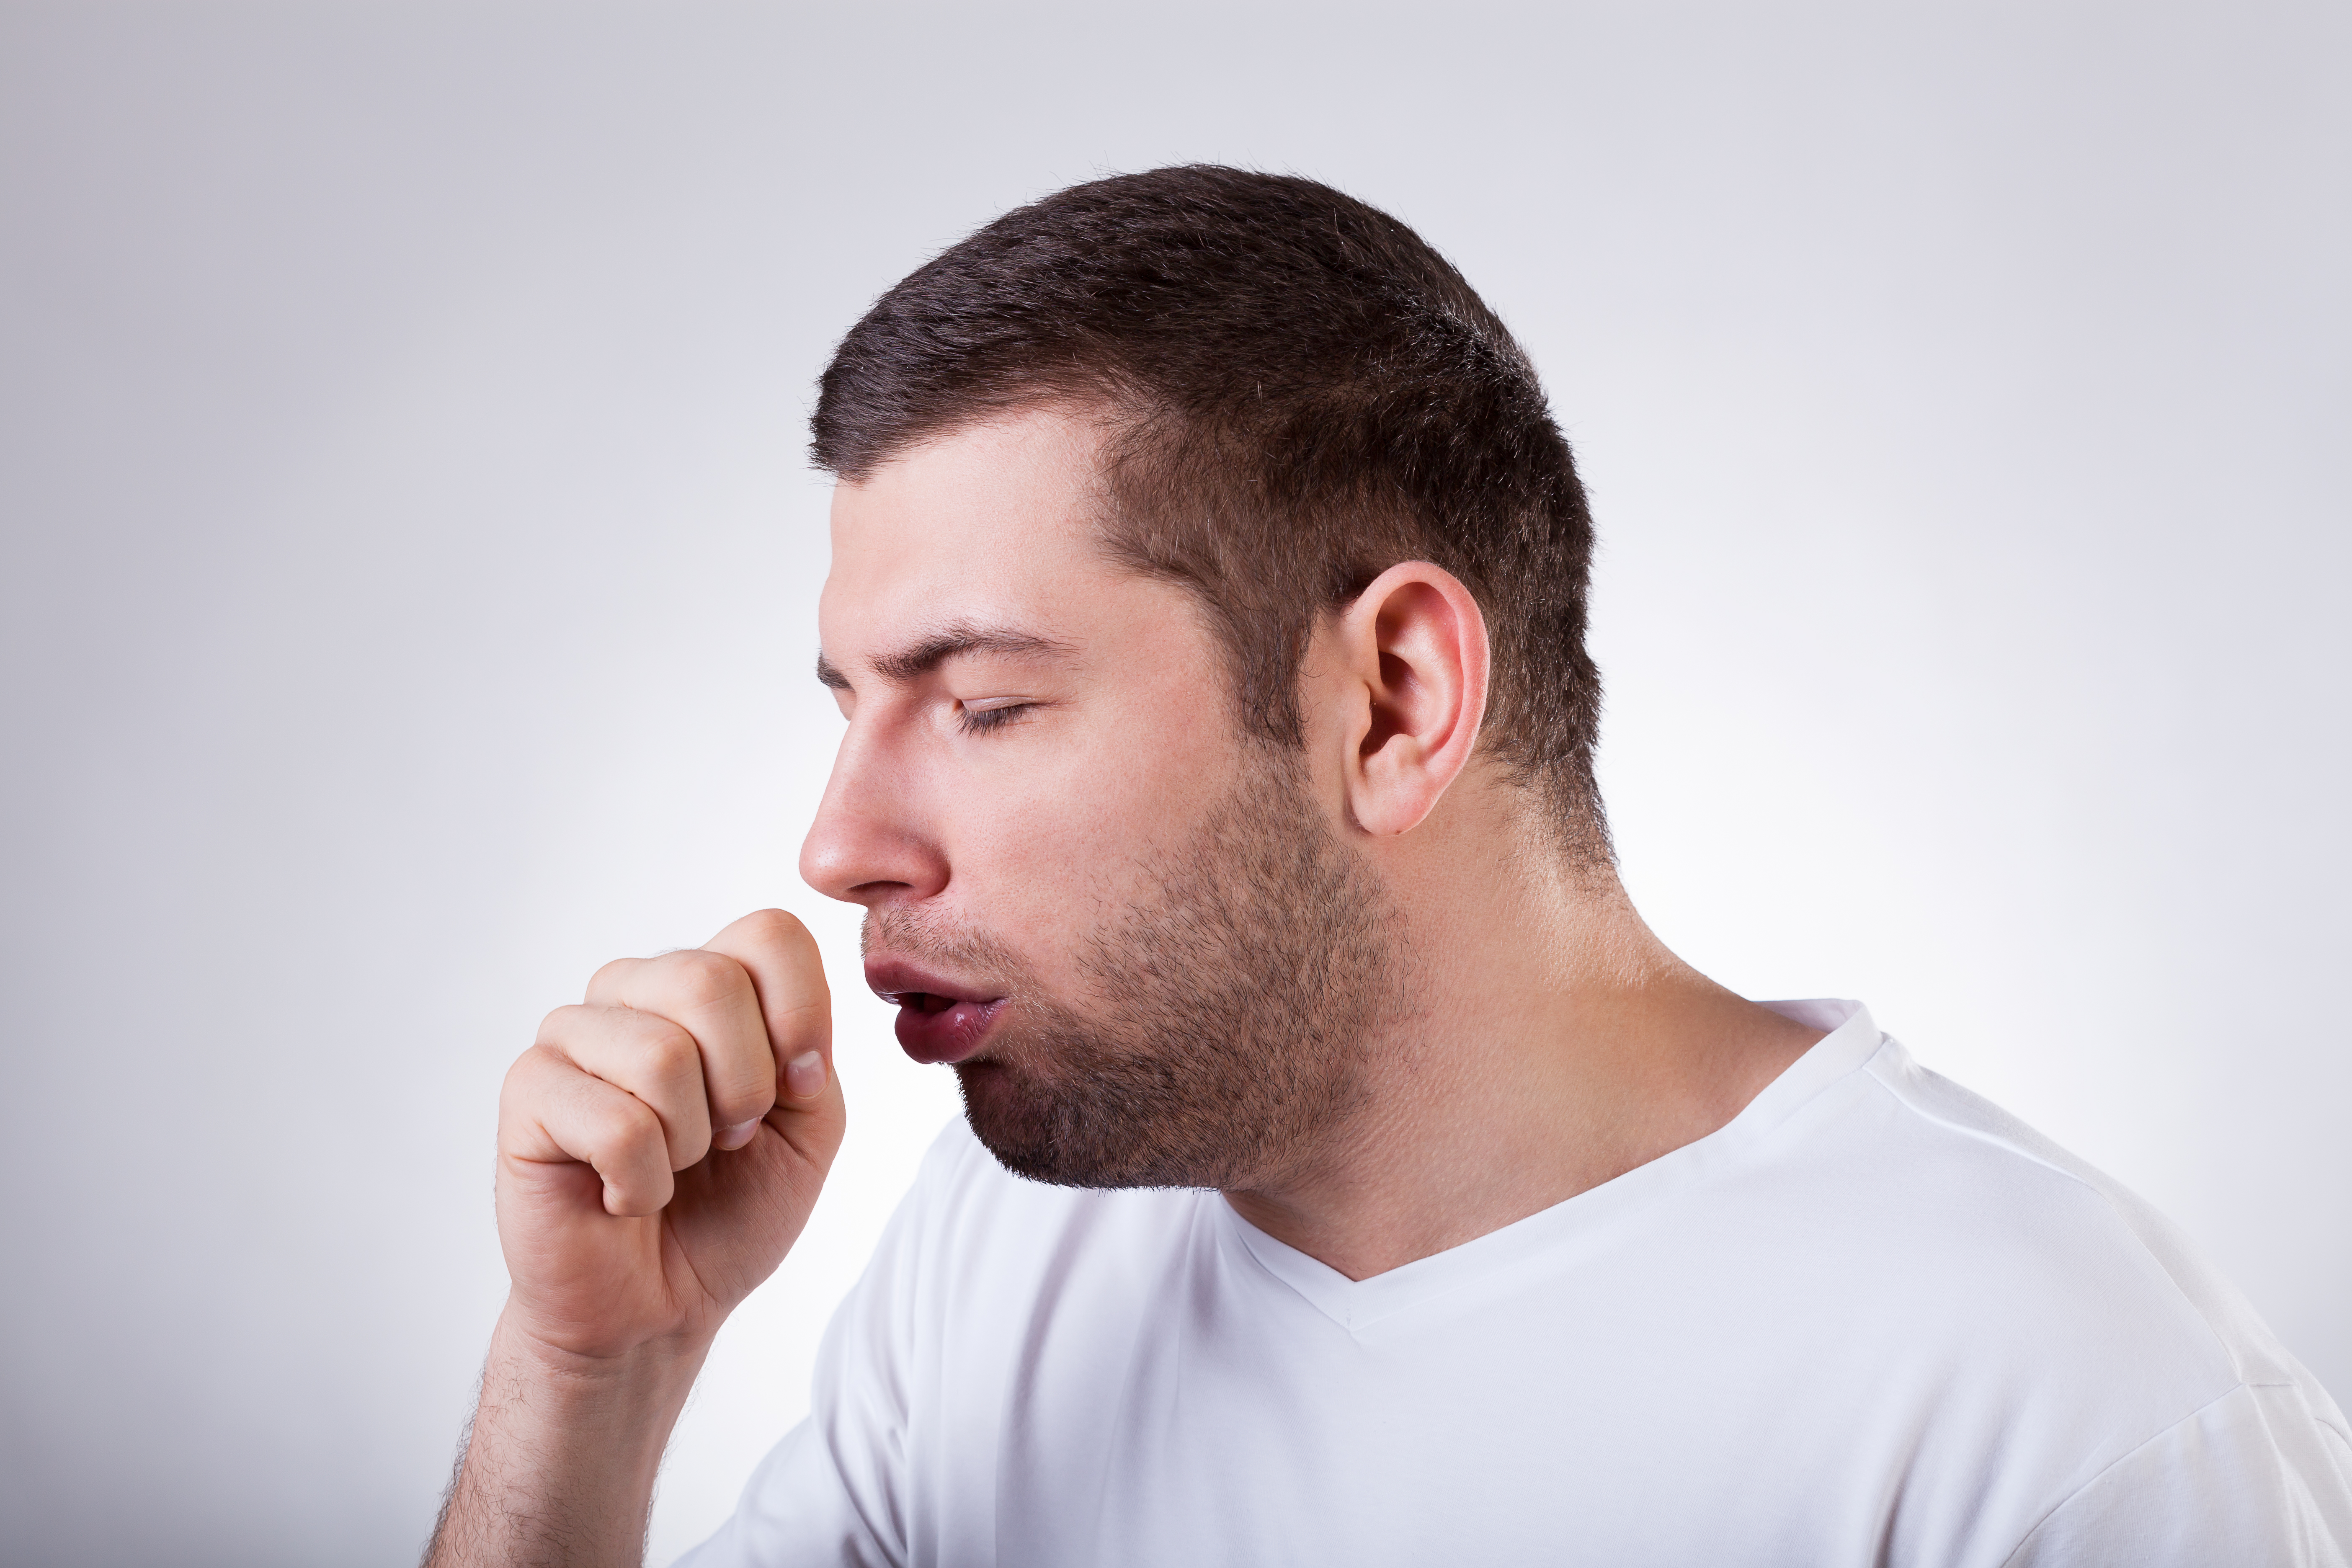 Coughing or shortness of breath may be a sign of low blood oxygen levels.